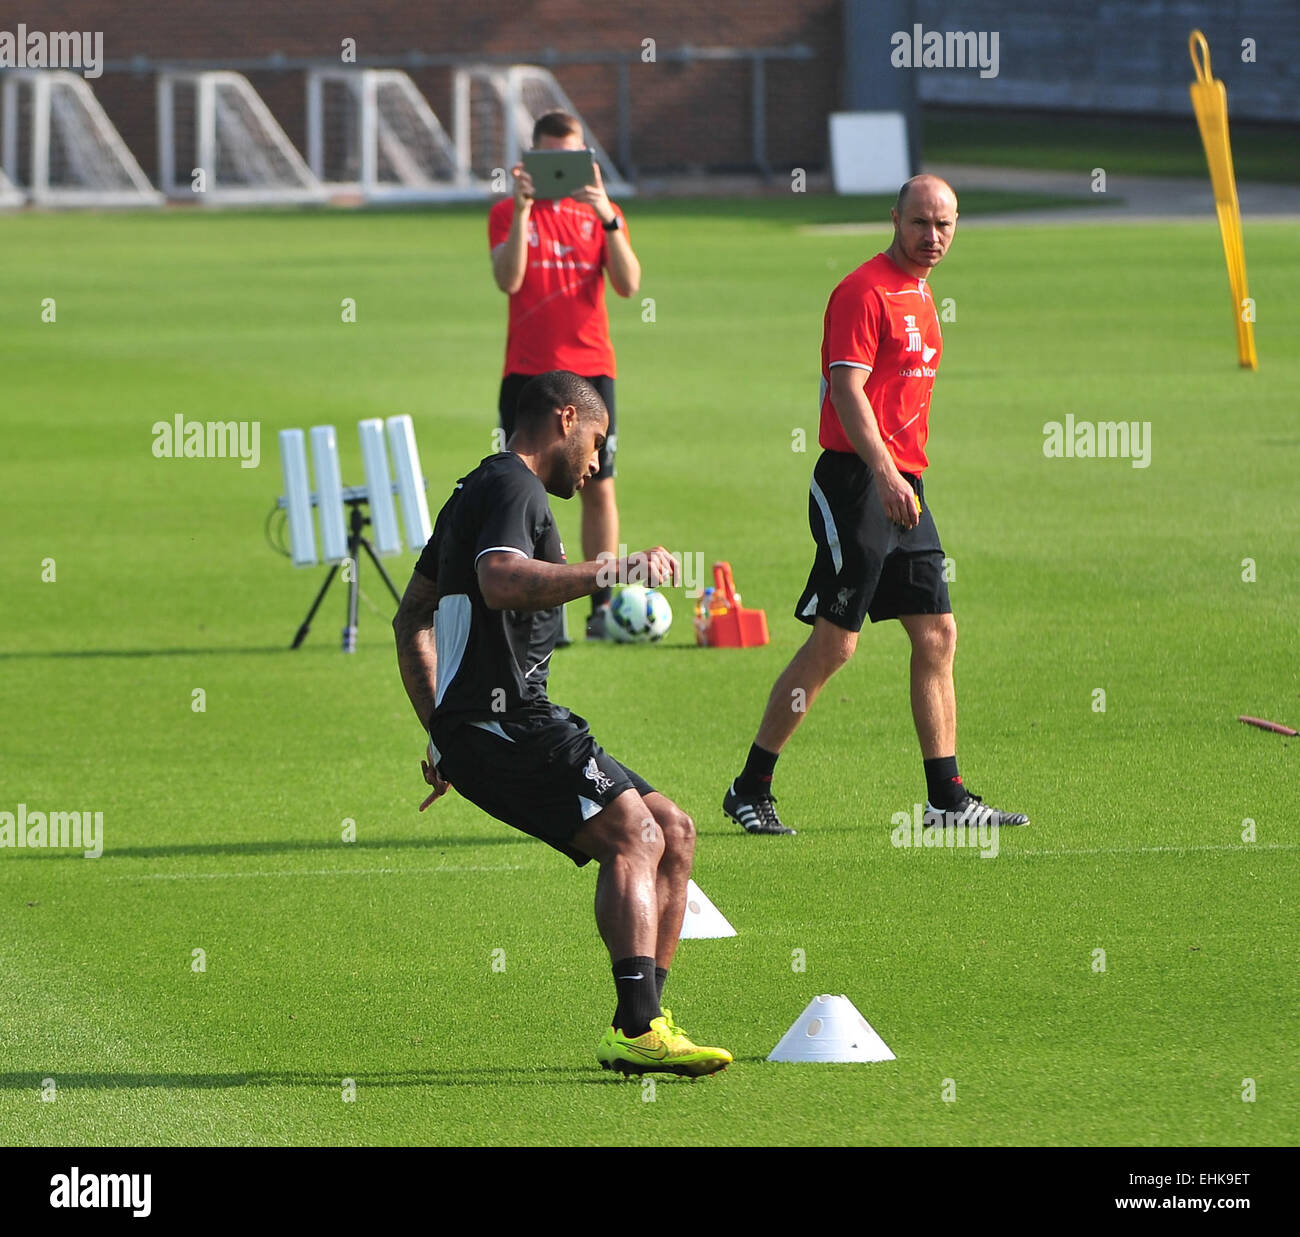 Liverpool F.C. players Martin Skrtel and Glen Johnson train separately at Melwood after picking up injuries in their last game for Liverpool Featuring: Glen Johnson Where: Liverpool, United Kingdom When: 10 Sep 2014 Stock Photo